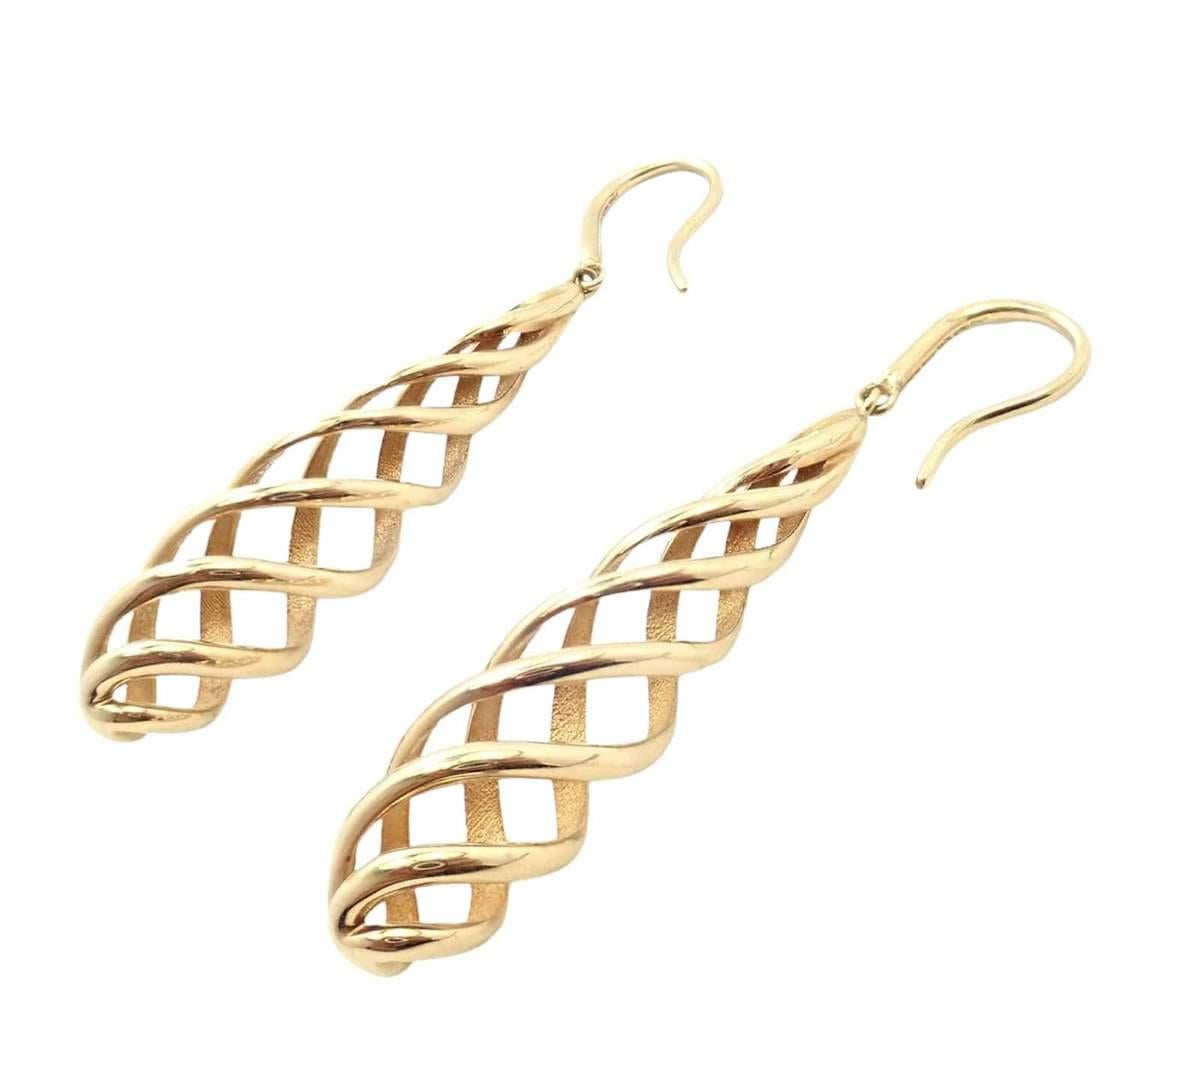 18k Yellow Gold Vintage Spiral Shell Earrings by Paloma Picasso made for Tiffany & Co.
These earrings were Made in Italy. 
Metal: 18k Yellow Gold
Size: 10mm x 55mm
Weight: 9.6 grams
Design: Paloma Picasso
Stamped Hallmarks: Tiffany & Co au750 Paloma